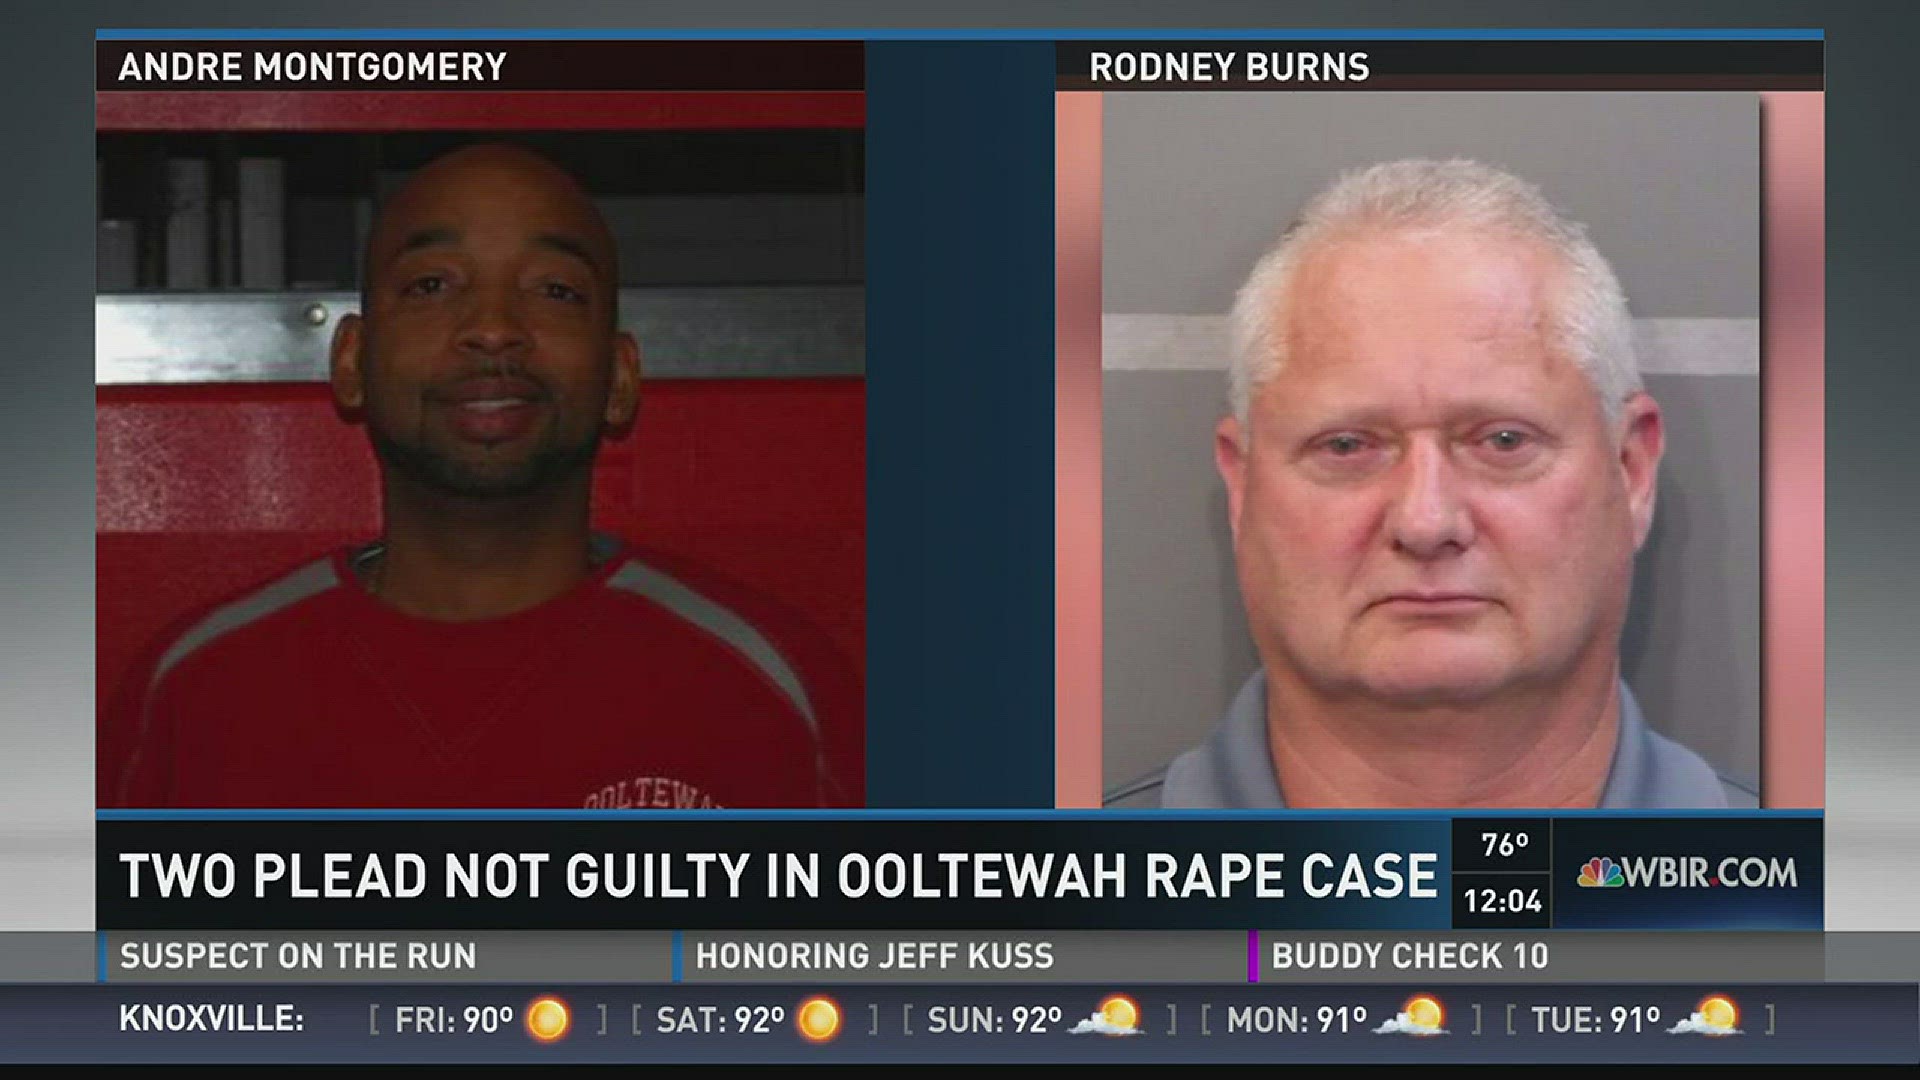 Andre Montgomery and Rodney Burns entered not guilty pleas in criminal court for charges related to the Ooltewah rape case.